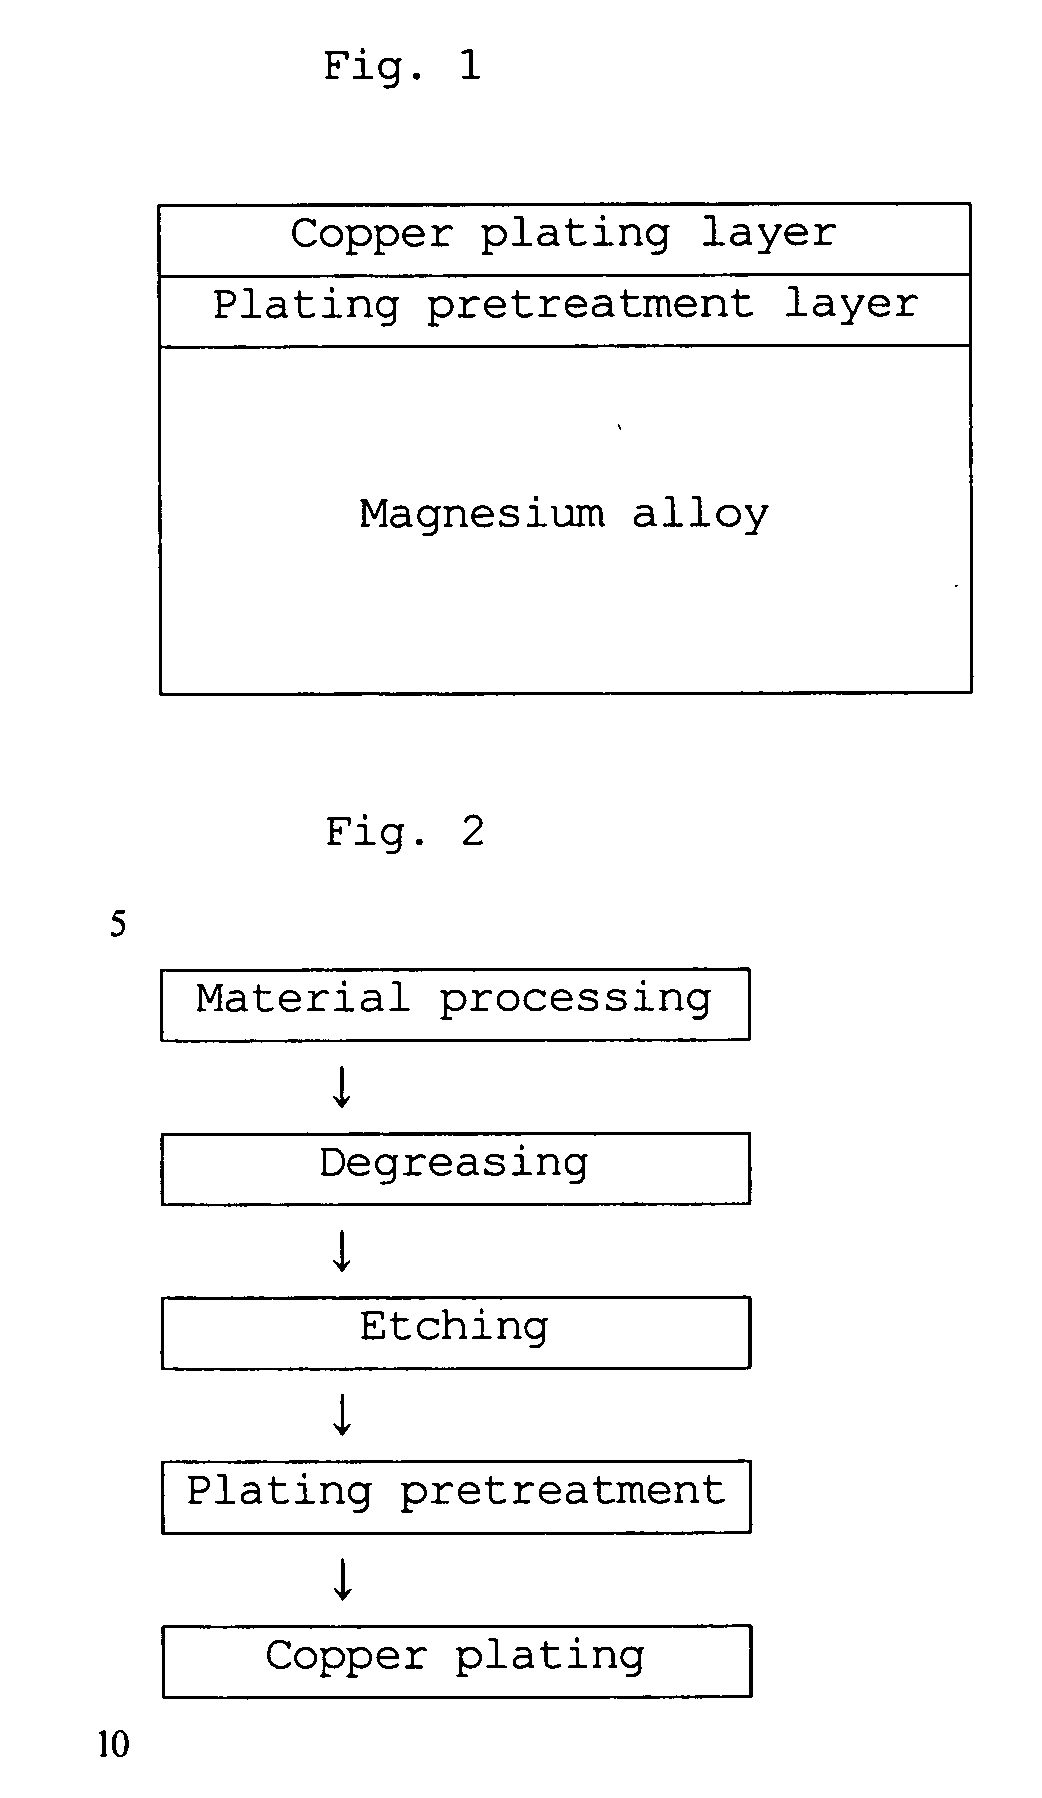 Method of preparing copper plating layer having high adhesion to magnesium alloy using electroplating